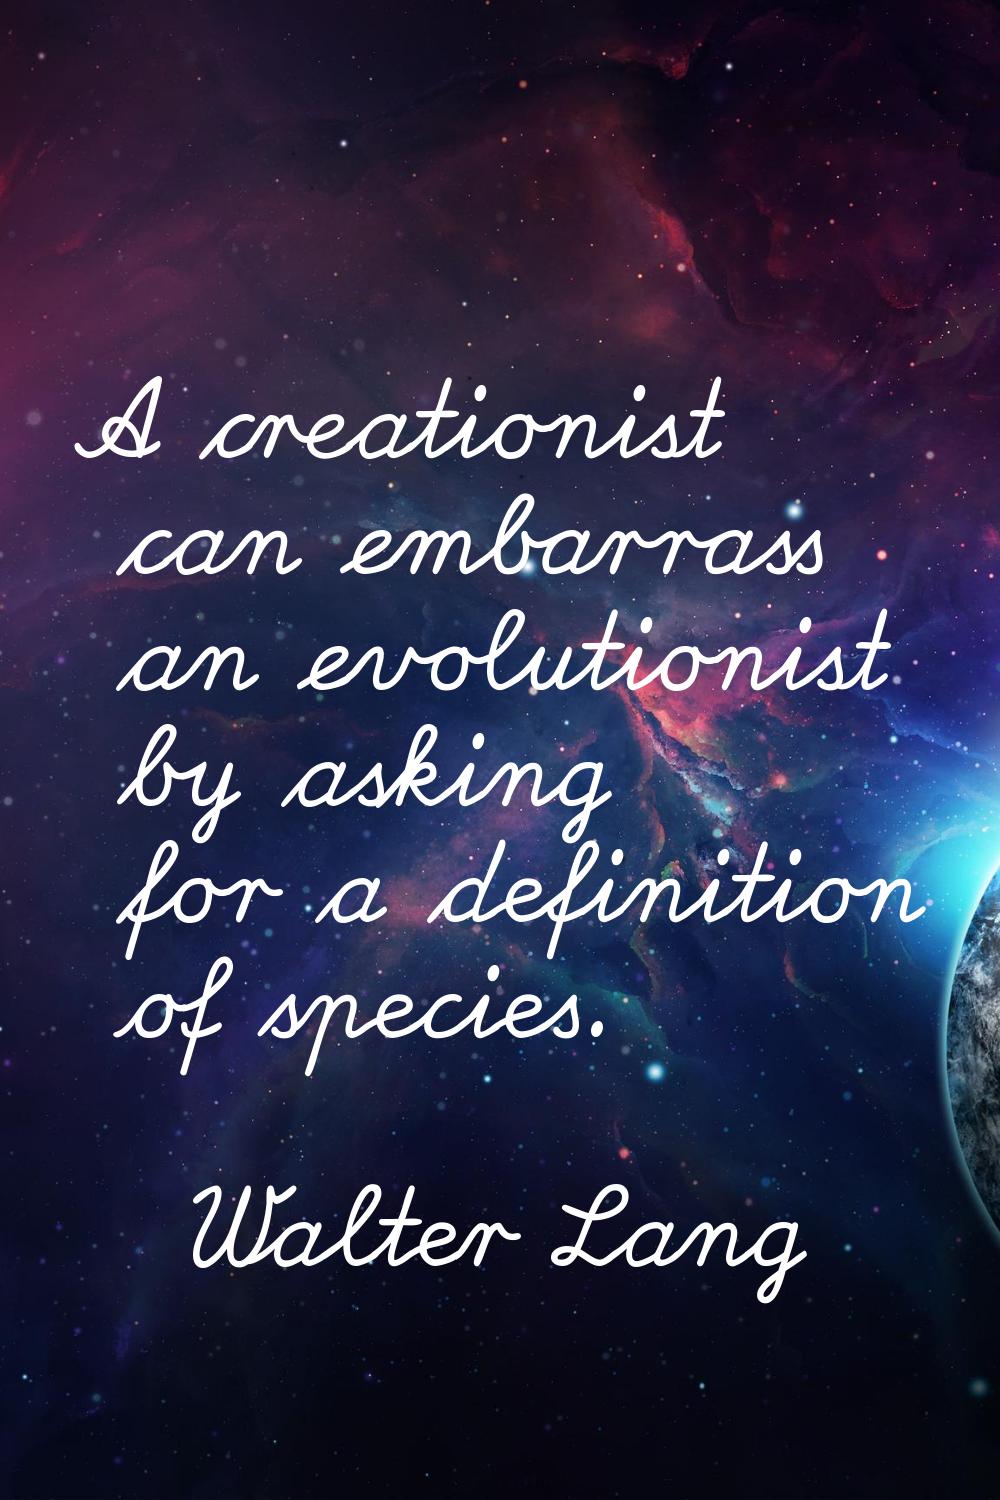 A creationist can embarrass an evolutionist by asking for a definition of species.